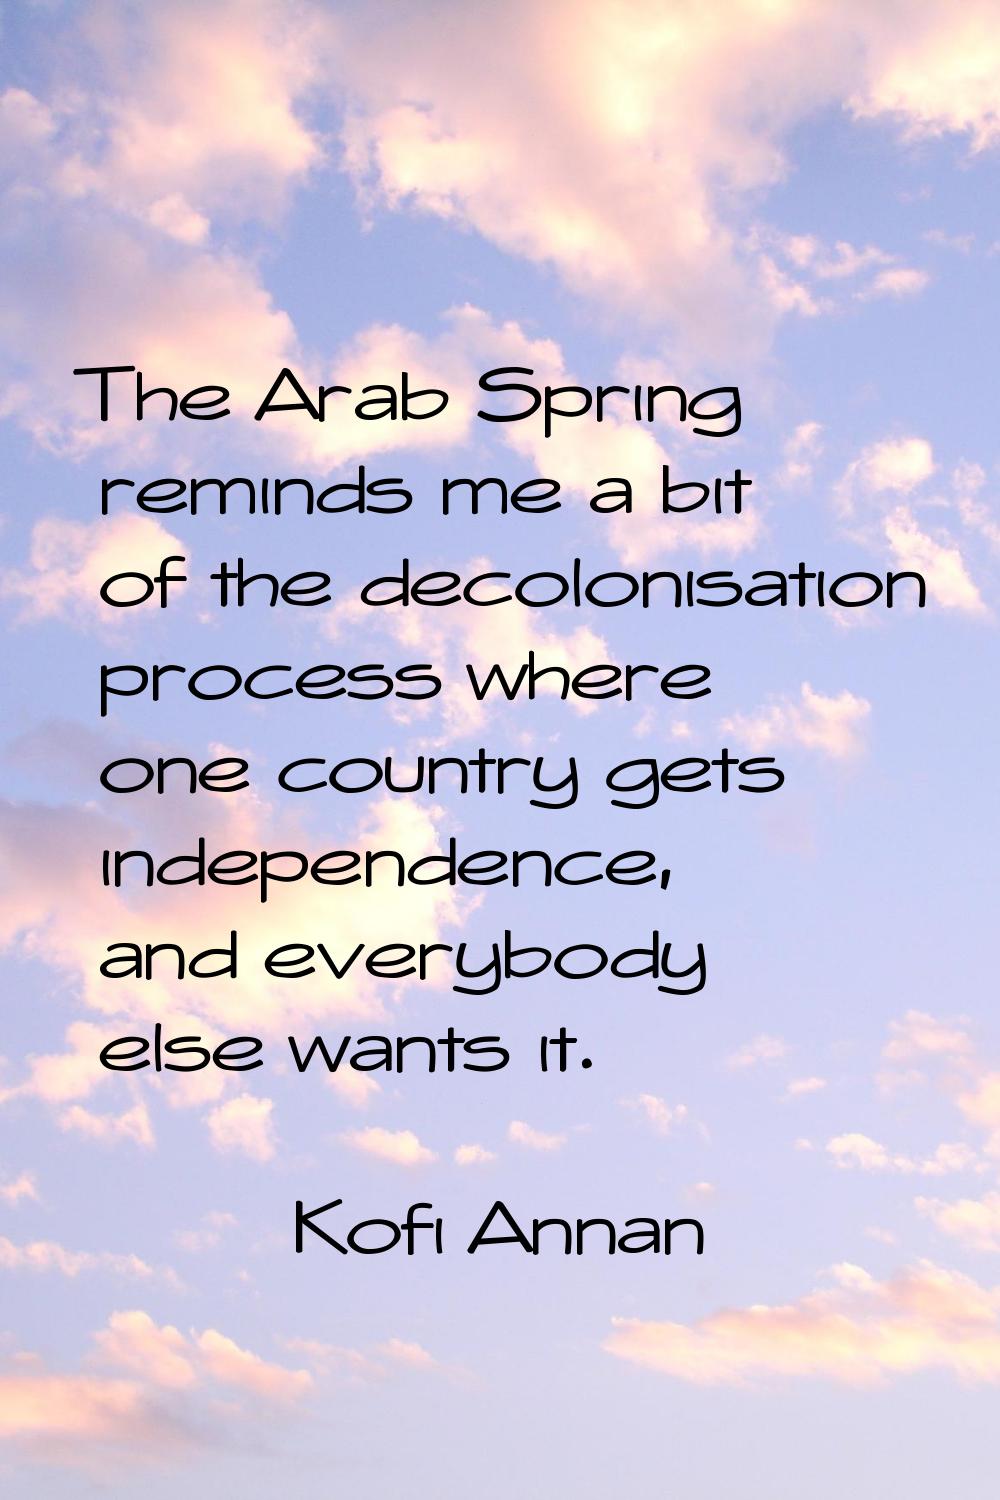 The Arab Spring reminds me a bit of the decolonisation process where one country gets independence,